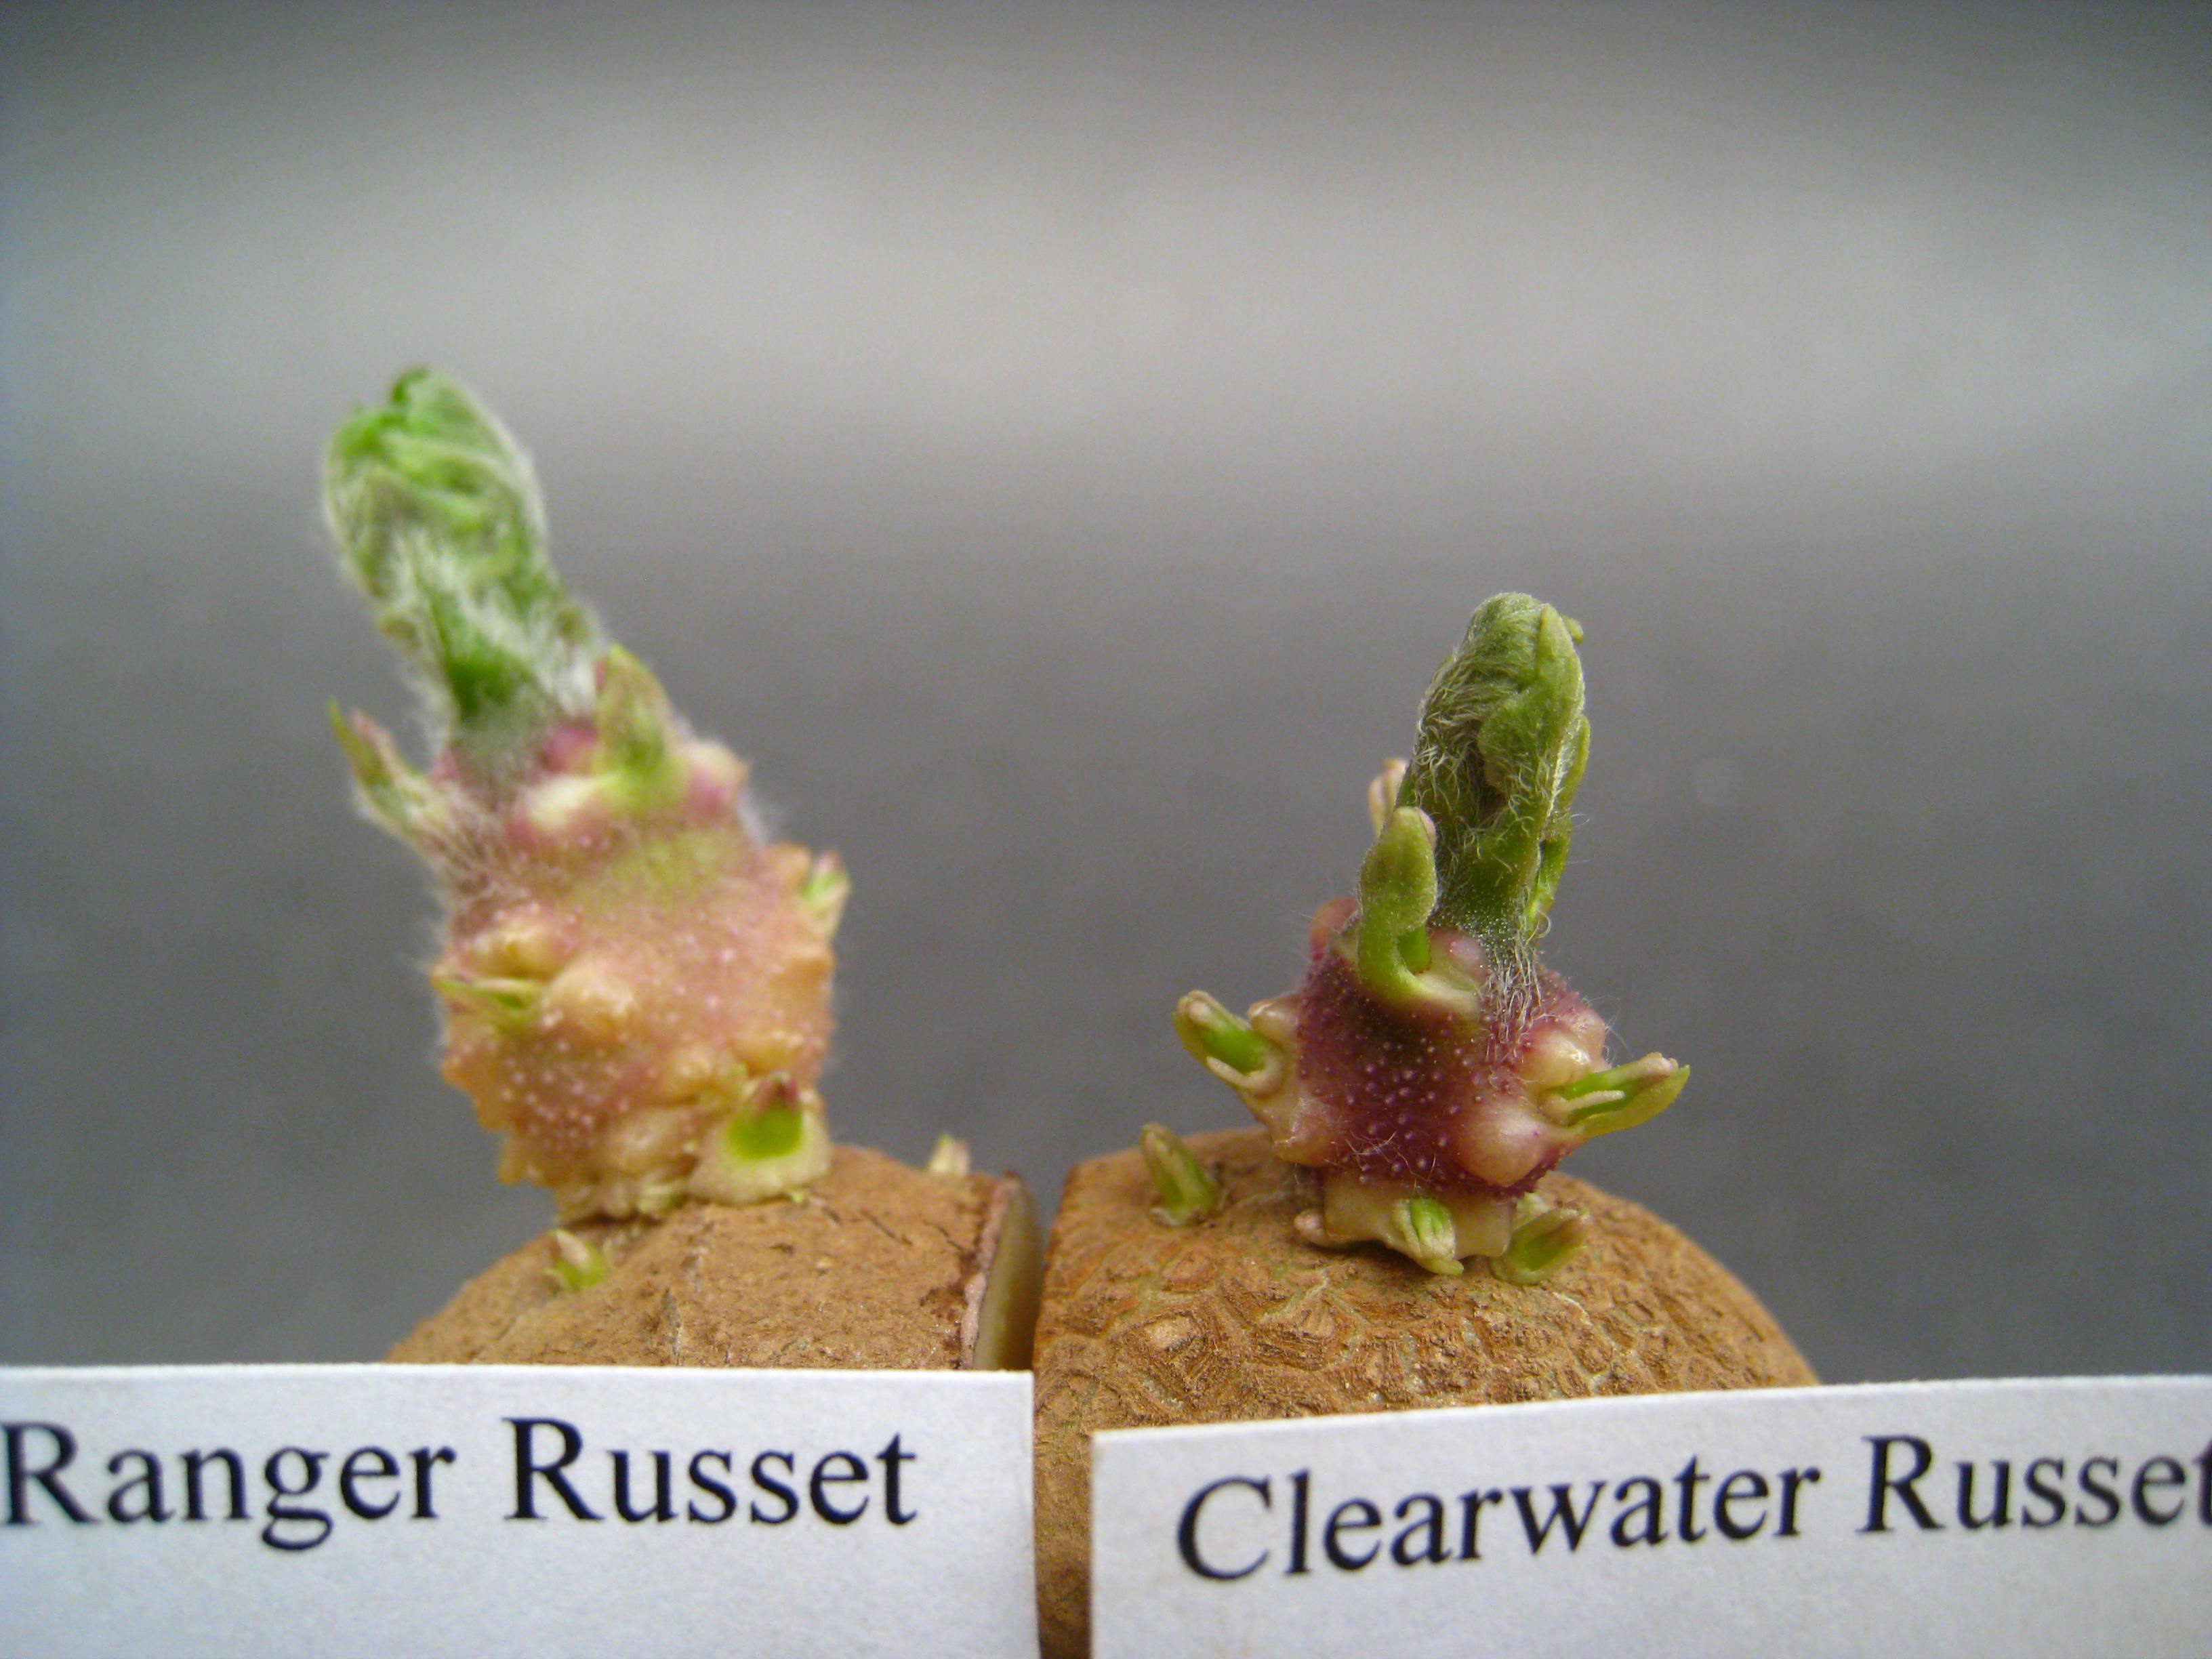 Clearwater Russet